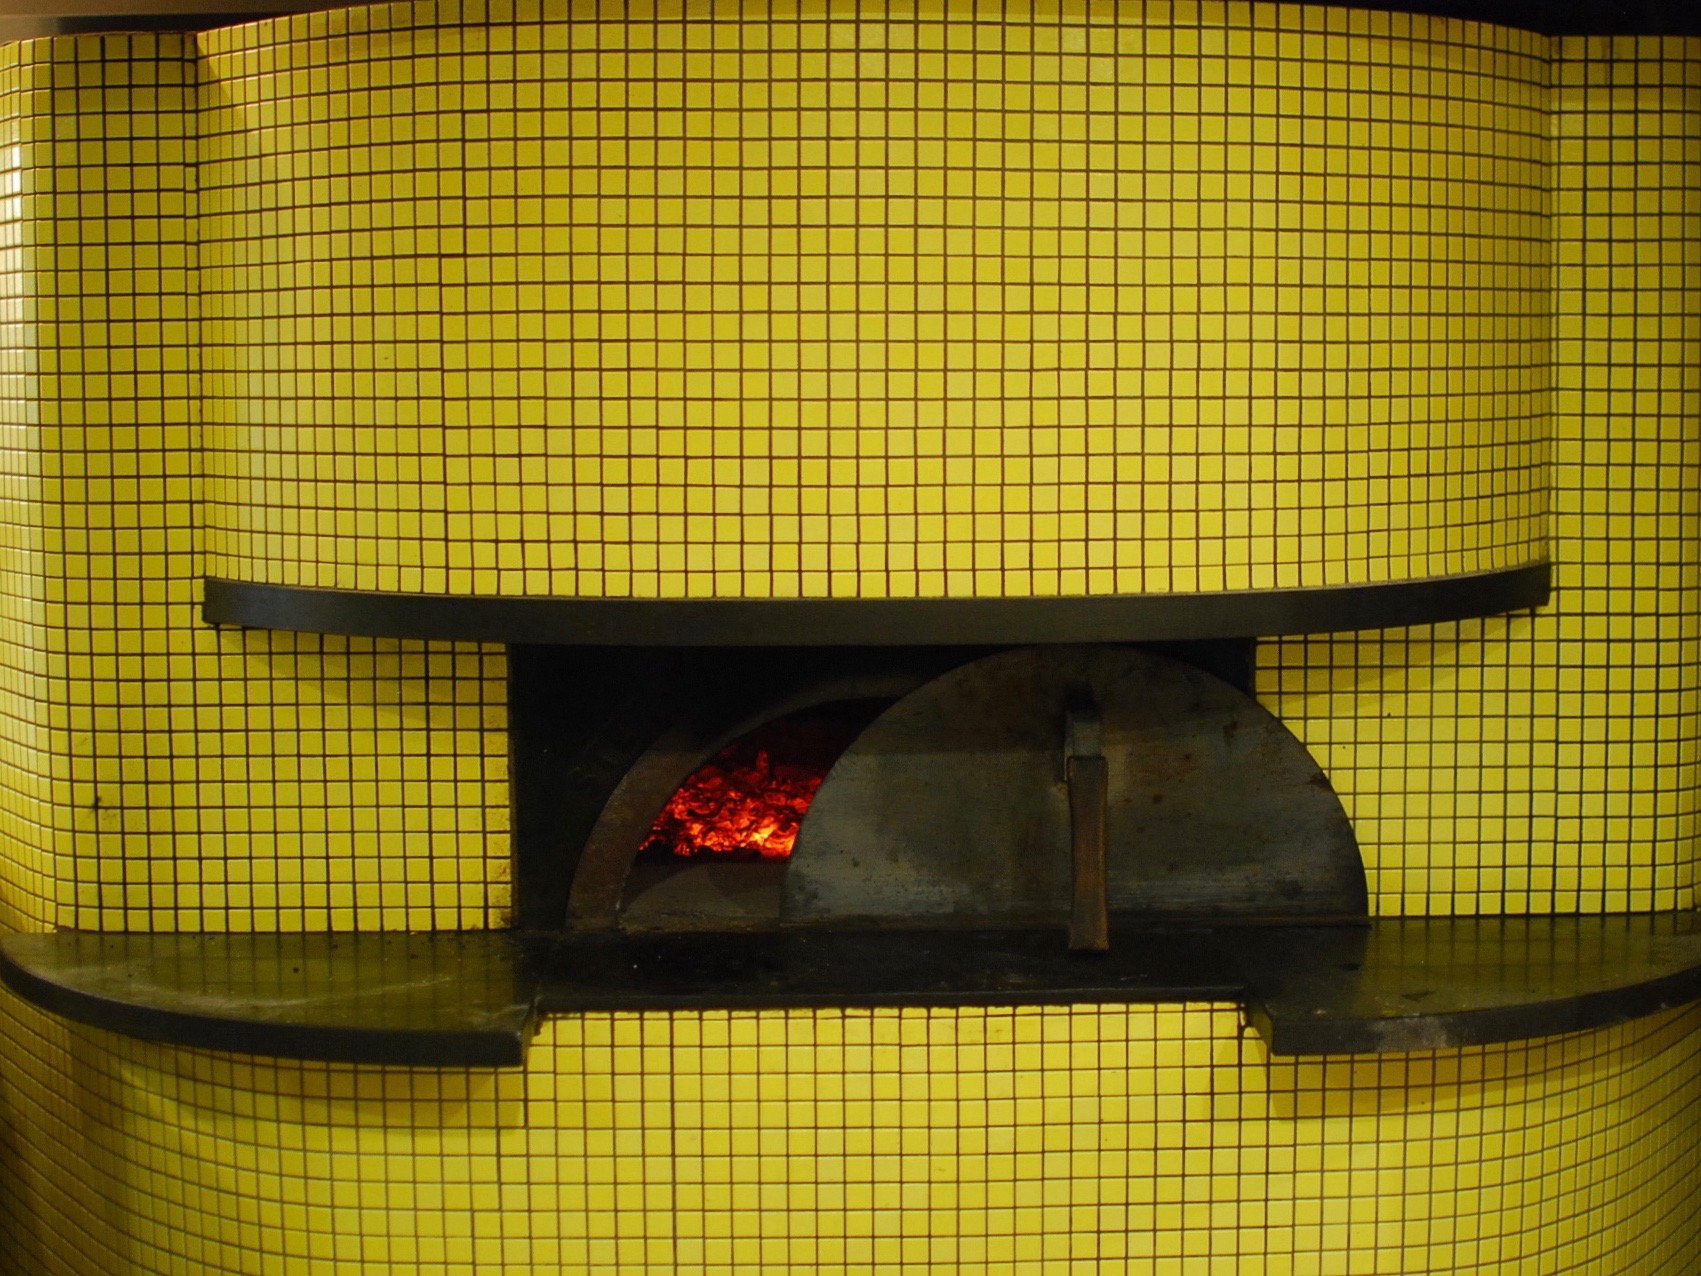 Pizza Oven Los Angeles